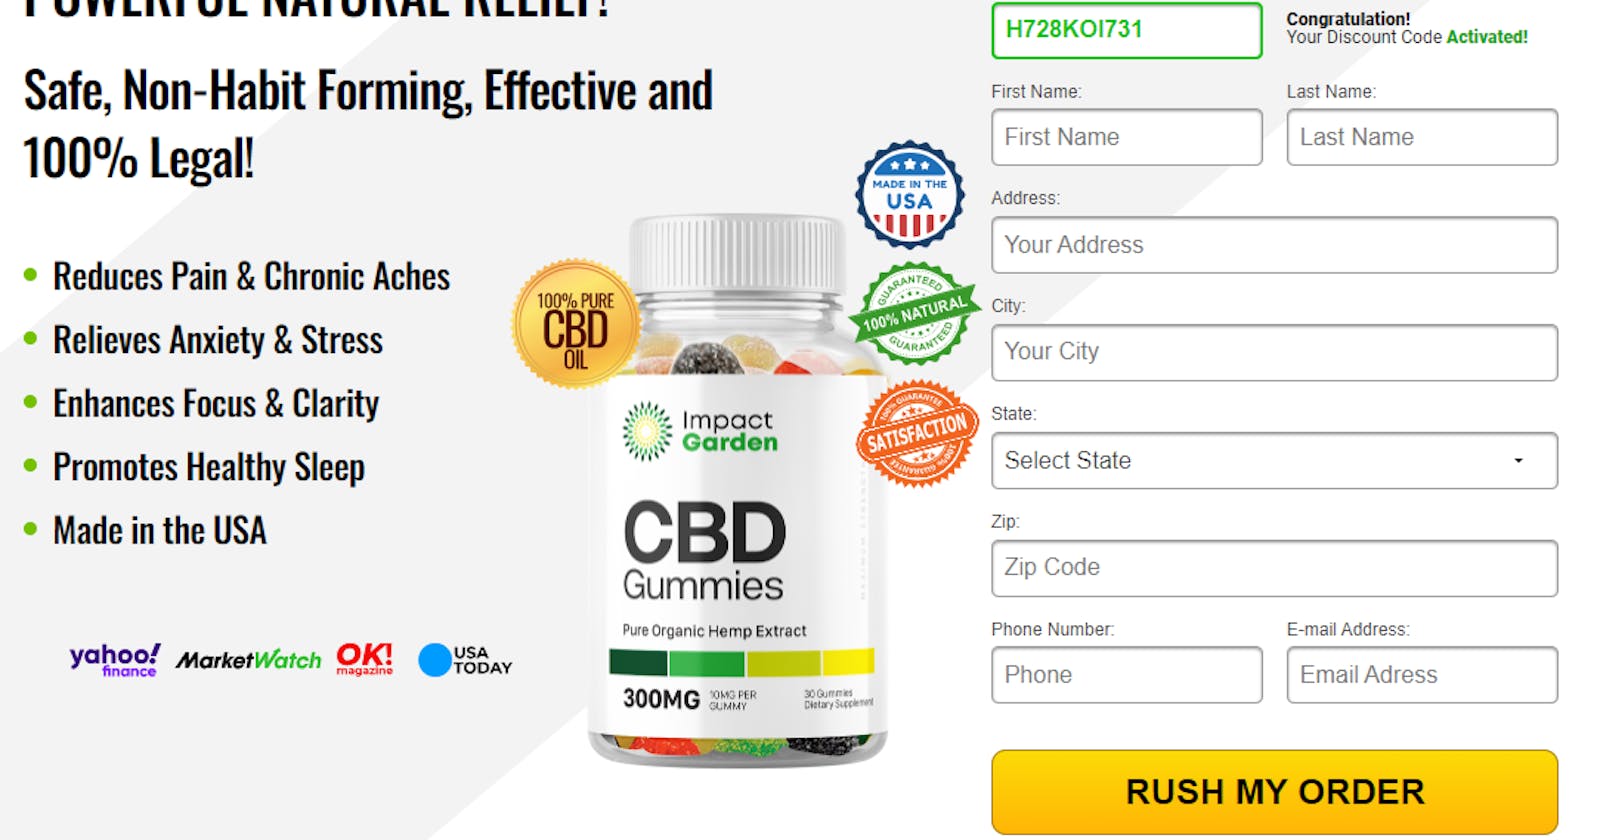 Impact Garden CBD Gummies Review, Cost, Price, Side Effects & Where To Buy?